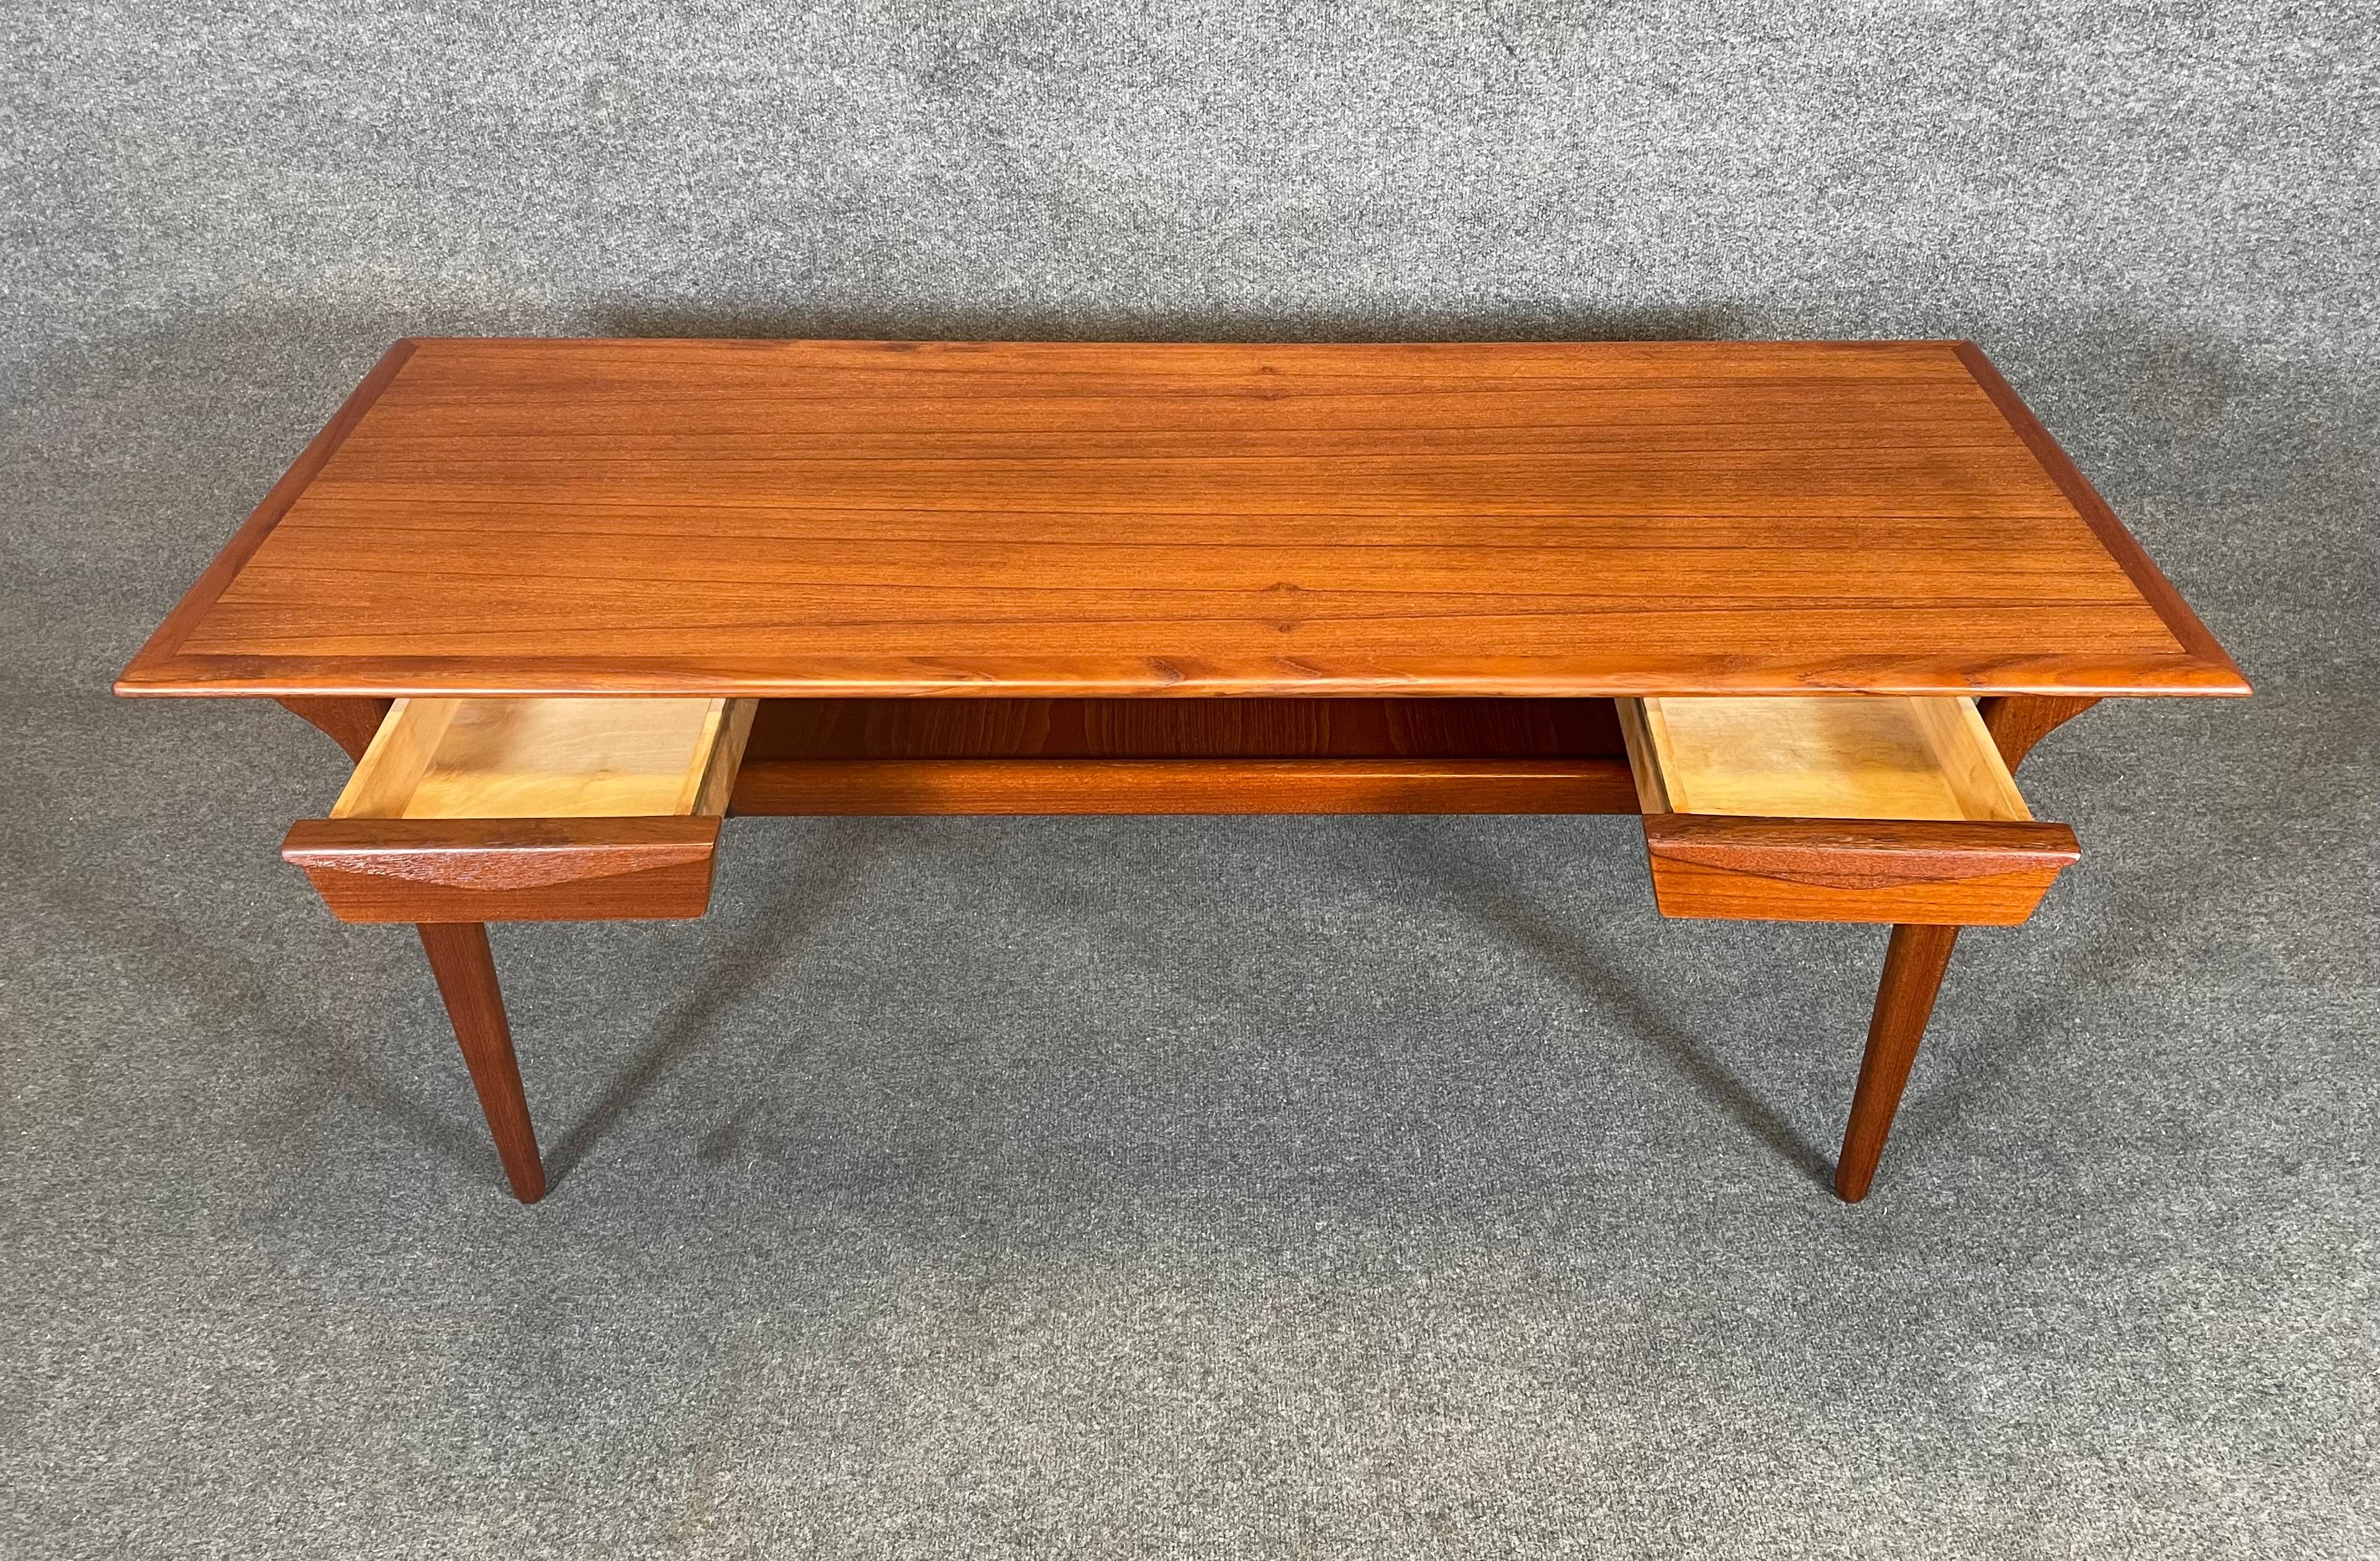 Here is a beautiful Scandinavian modern cocktail table in teak manufactured in Denmark in the 1960's.
This exquisite table, recently imported from Europe to California before its refinishing, features a vibrant wood grain, a large top, four small